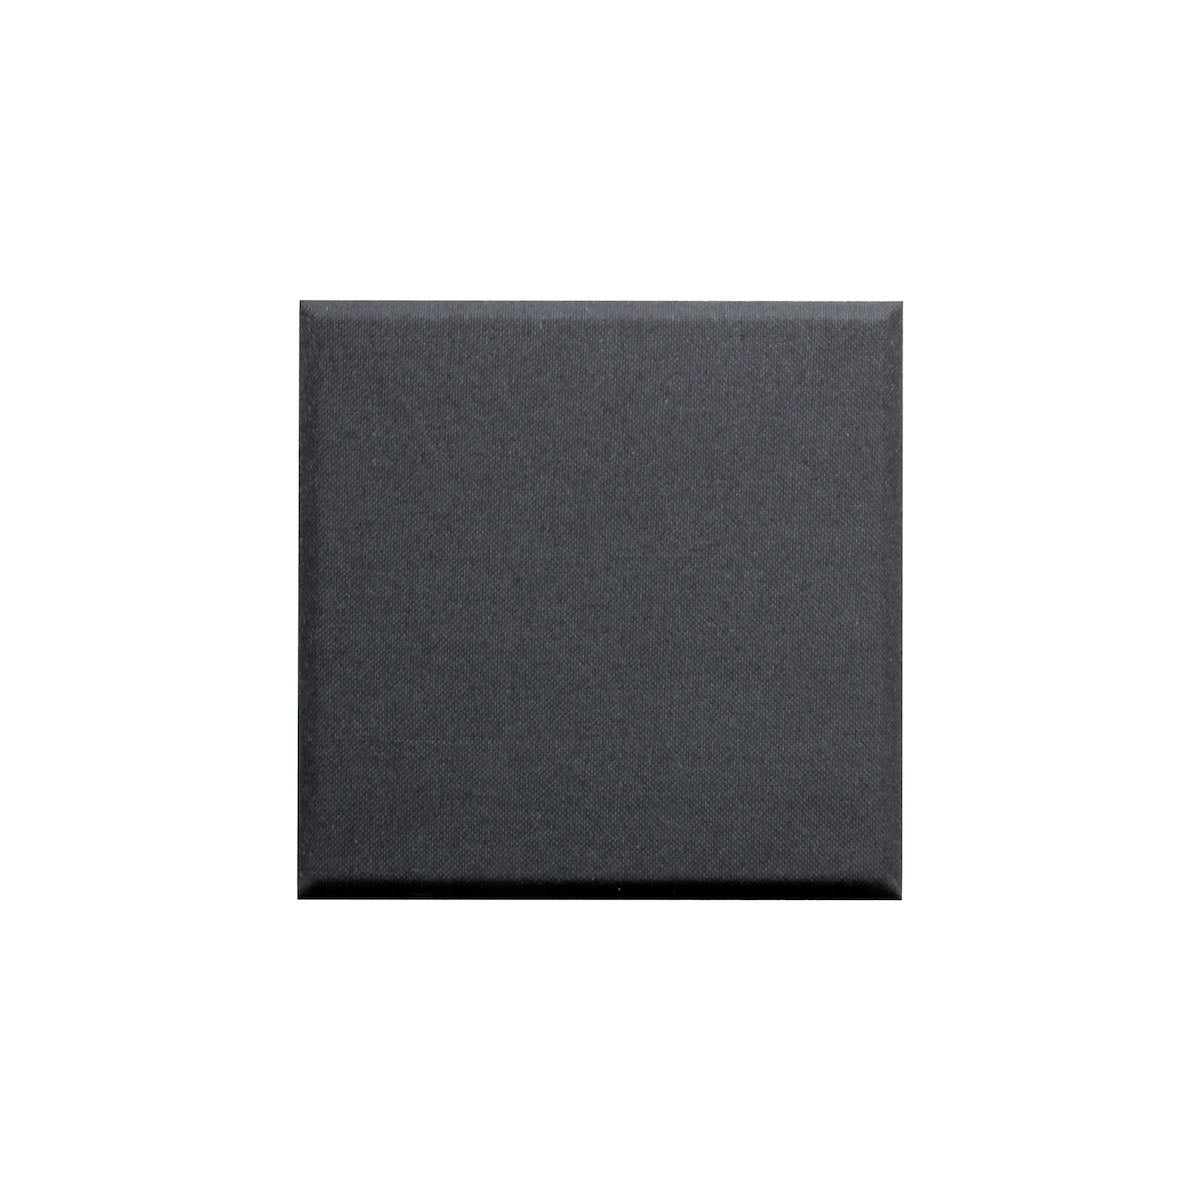 Primacoustic Broadway Wall Panels - Control Cubes, Black